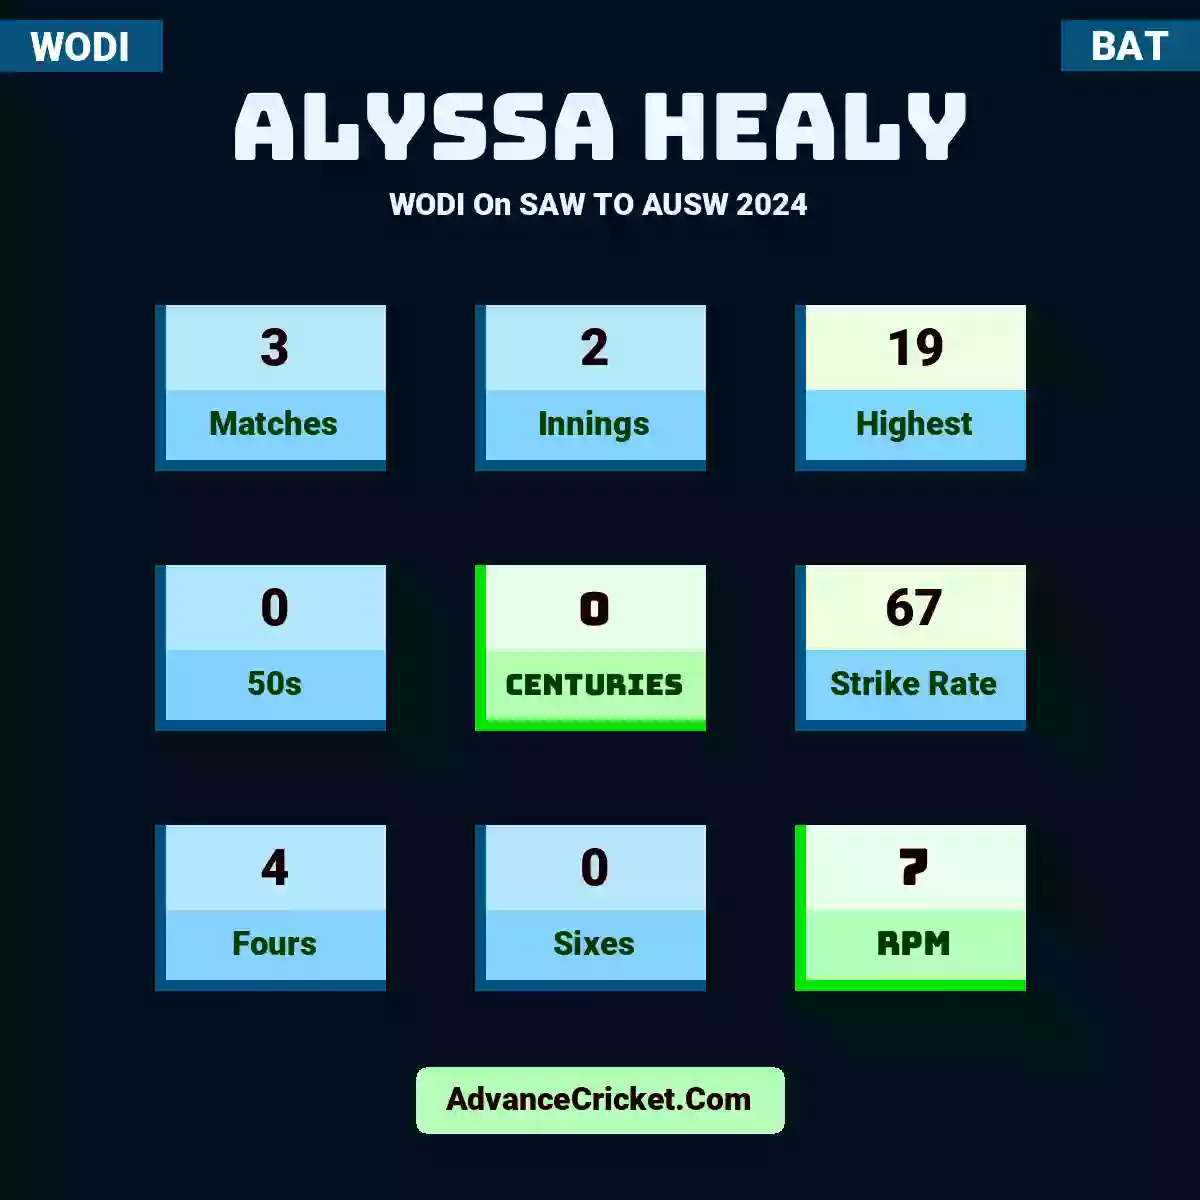 Alyssa Healy WODI  On SAW TO AUSW 2024, Alyssa Healy played 3 matches, scored 19 runs as highest, 0 half-centuries, and 0 centuries, with a strike rate of 67. A.Healy hit 4 fours and 0 sixes, with an RPM of 7.